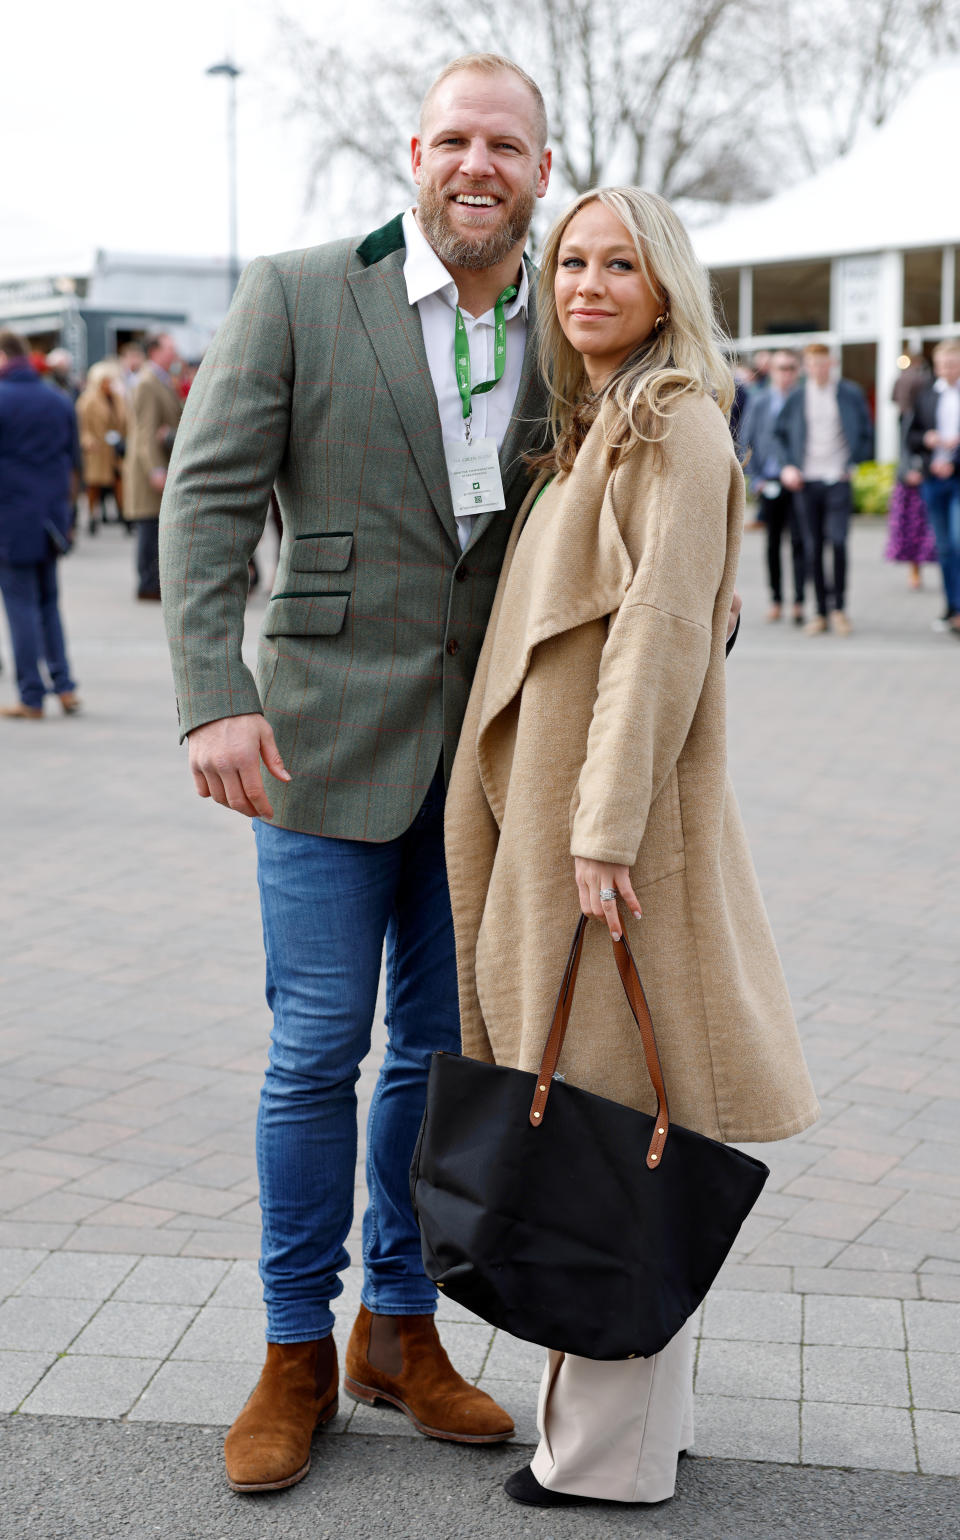 James Haskell and Chloe Madeley have become parents, pictured together last year. (Getty Images)